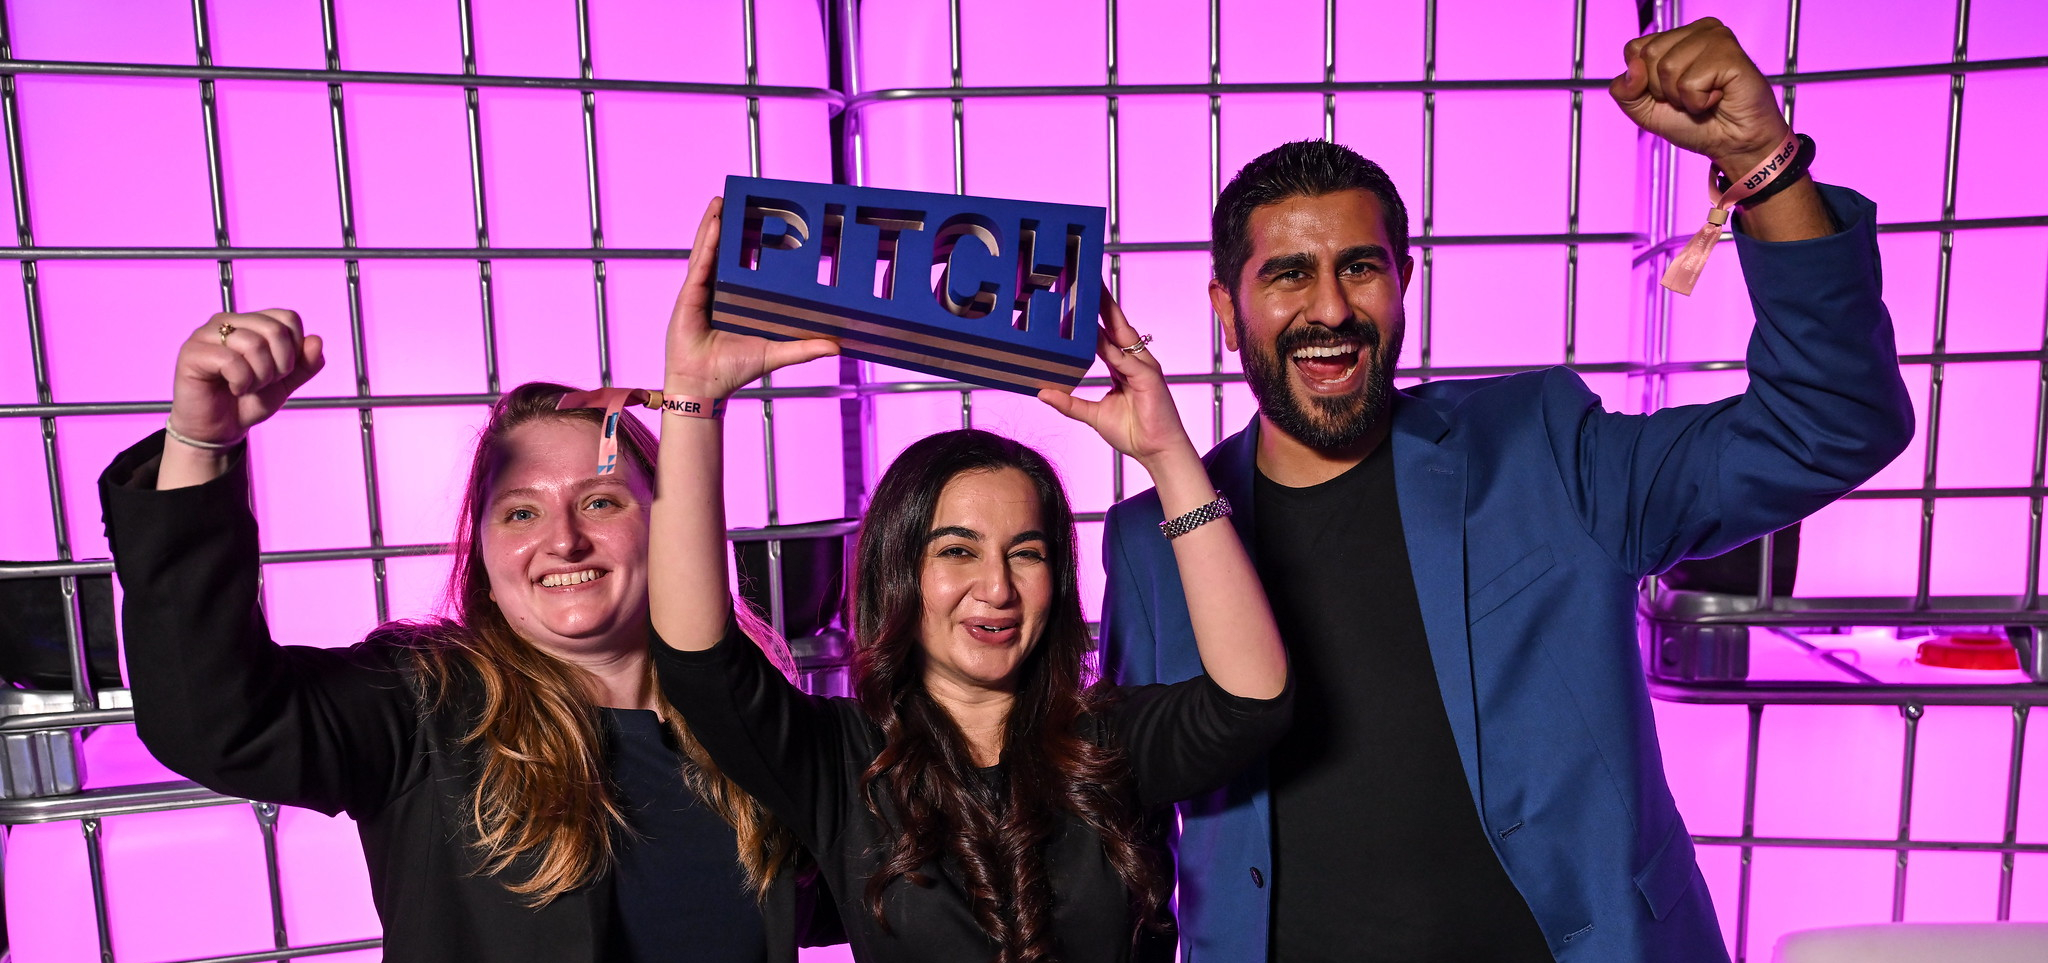 Three smiling people facing the camera raise their arms above their heads in apparent celebration. The person in the middle is holding a wooden trapezoidal trophy with the word PITCH laser cut in it. These are the winners of PITCH at Web Summit Qatar. In the centre is Breshna founder and CEO Mariam Nusrat. On the left is Breshna VP Joanna Kurylo. On the right is Blockchain Founders Fund managing partner Aly Madhavji, an investor in Breshna.